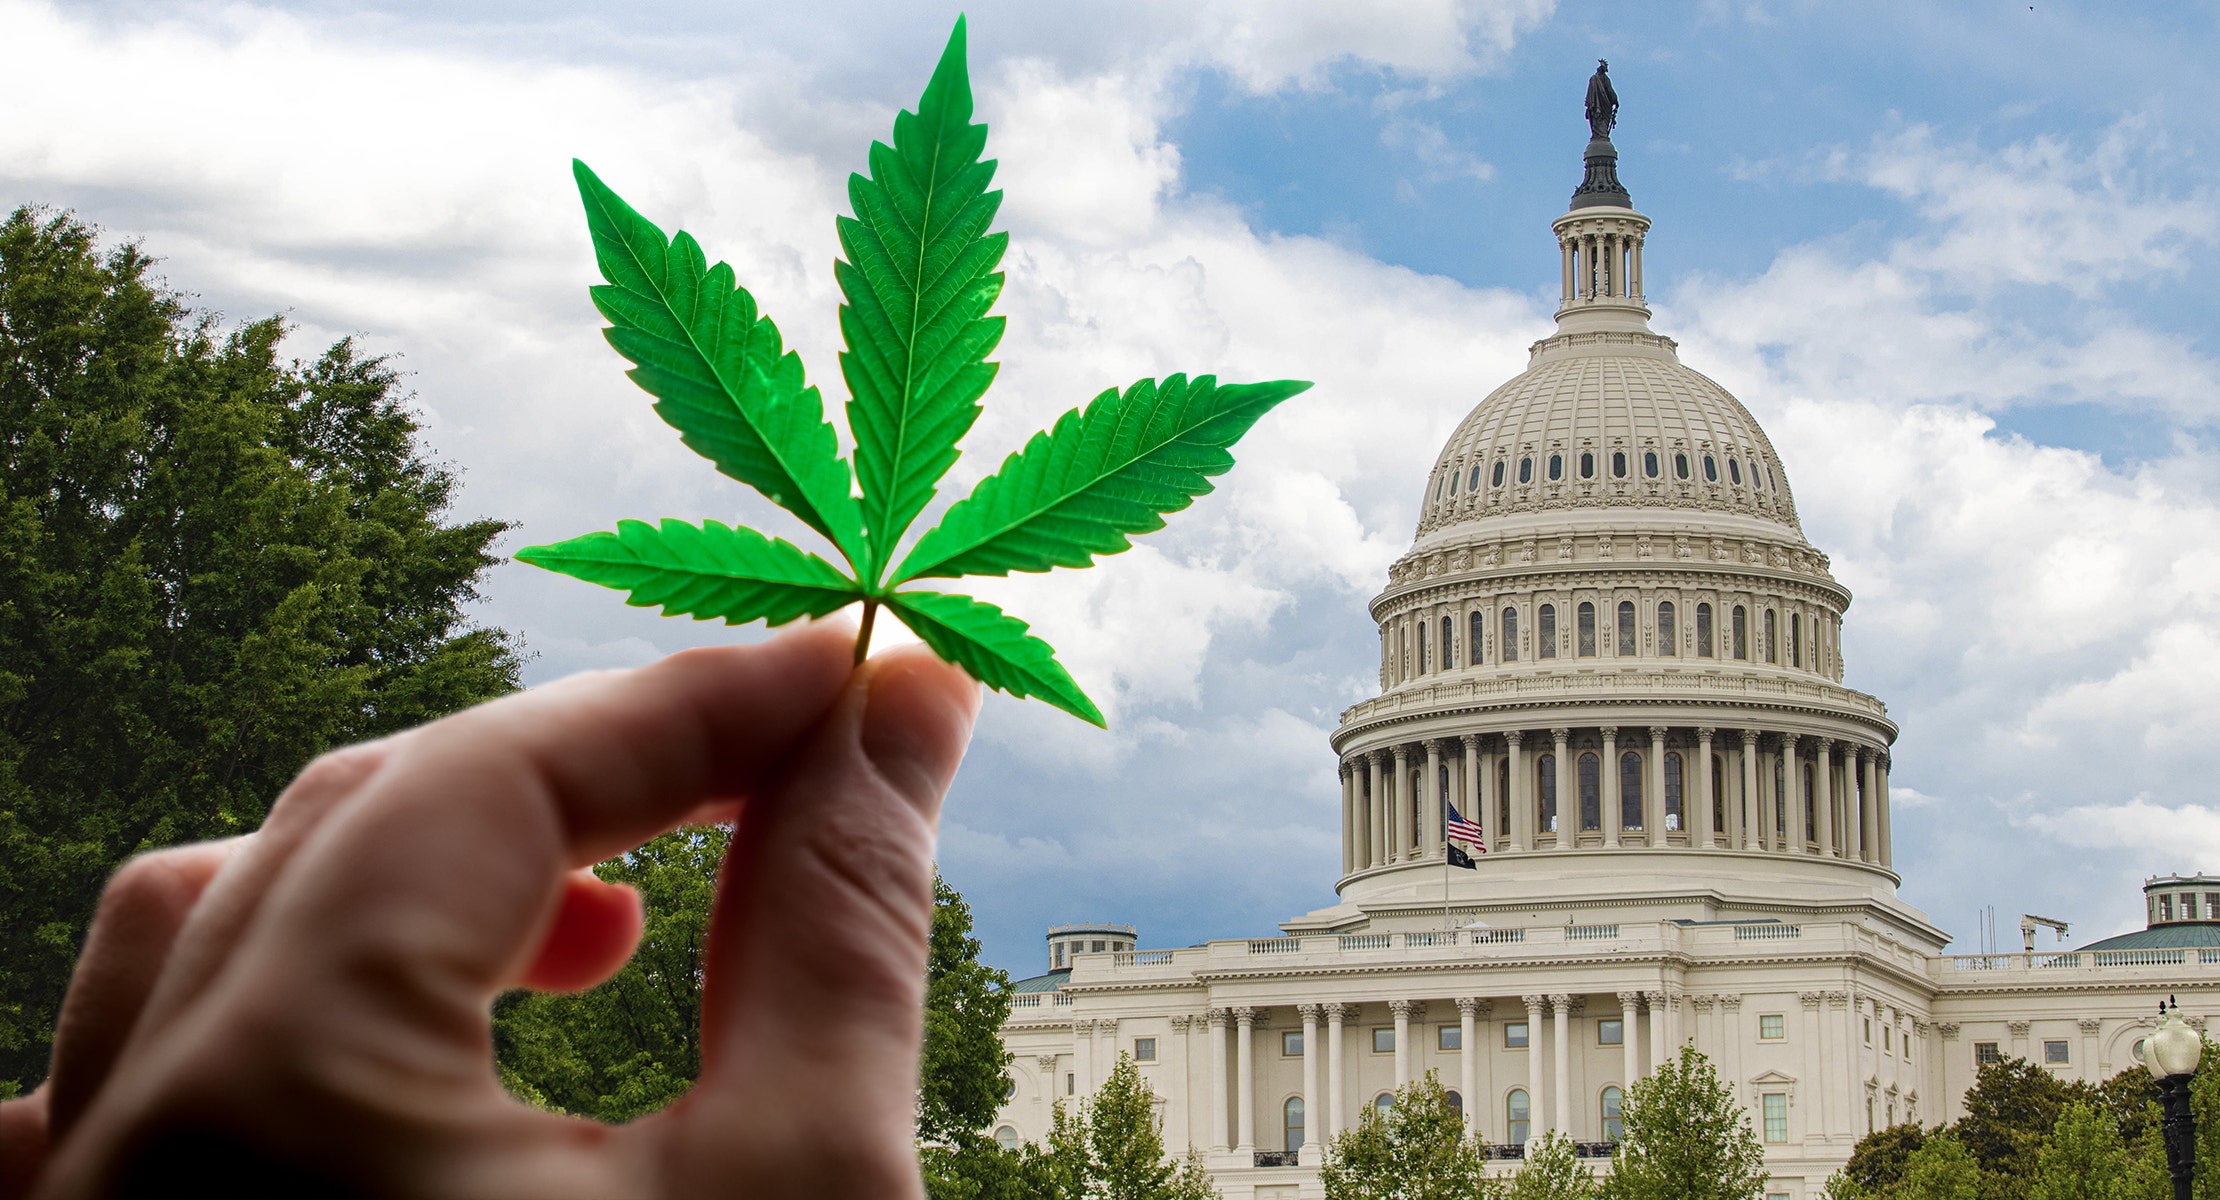 Biden's Pardon Could Help SAFE Plus, Cantor Fitzgerald Says: What Happens Now To Cannabis Stocks?